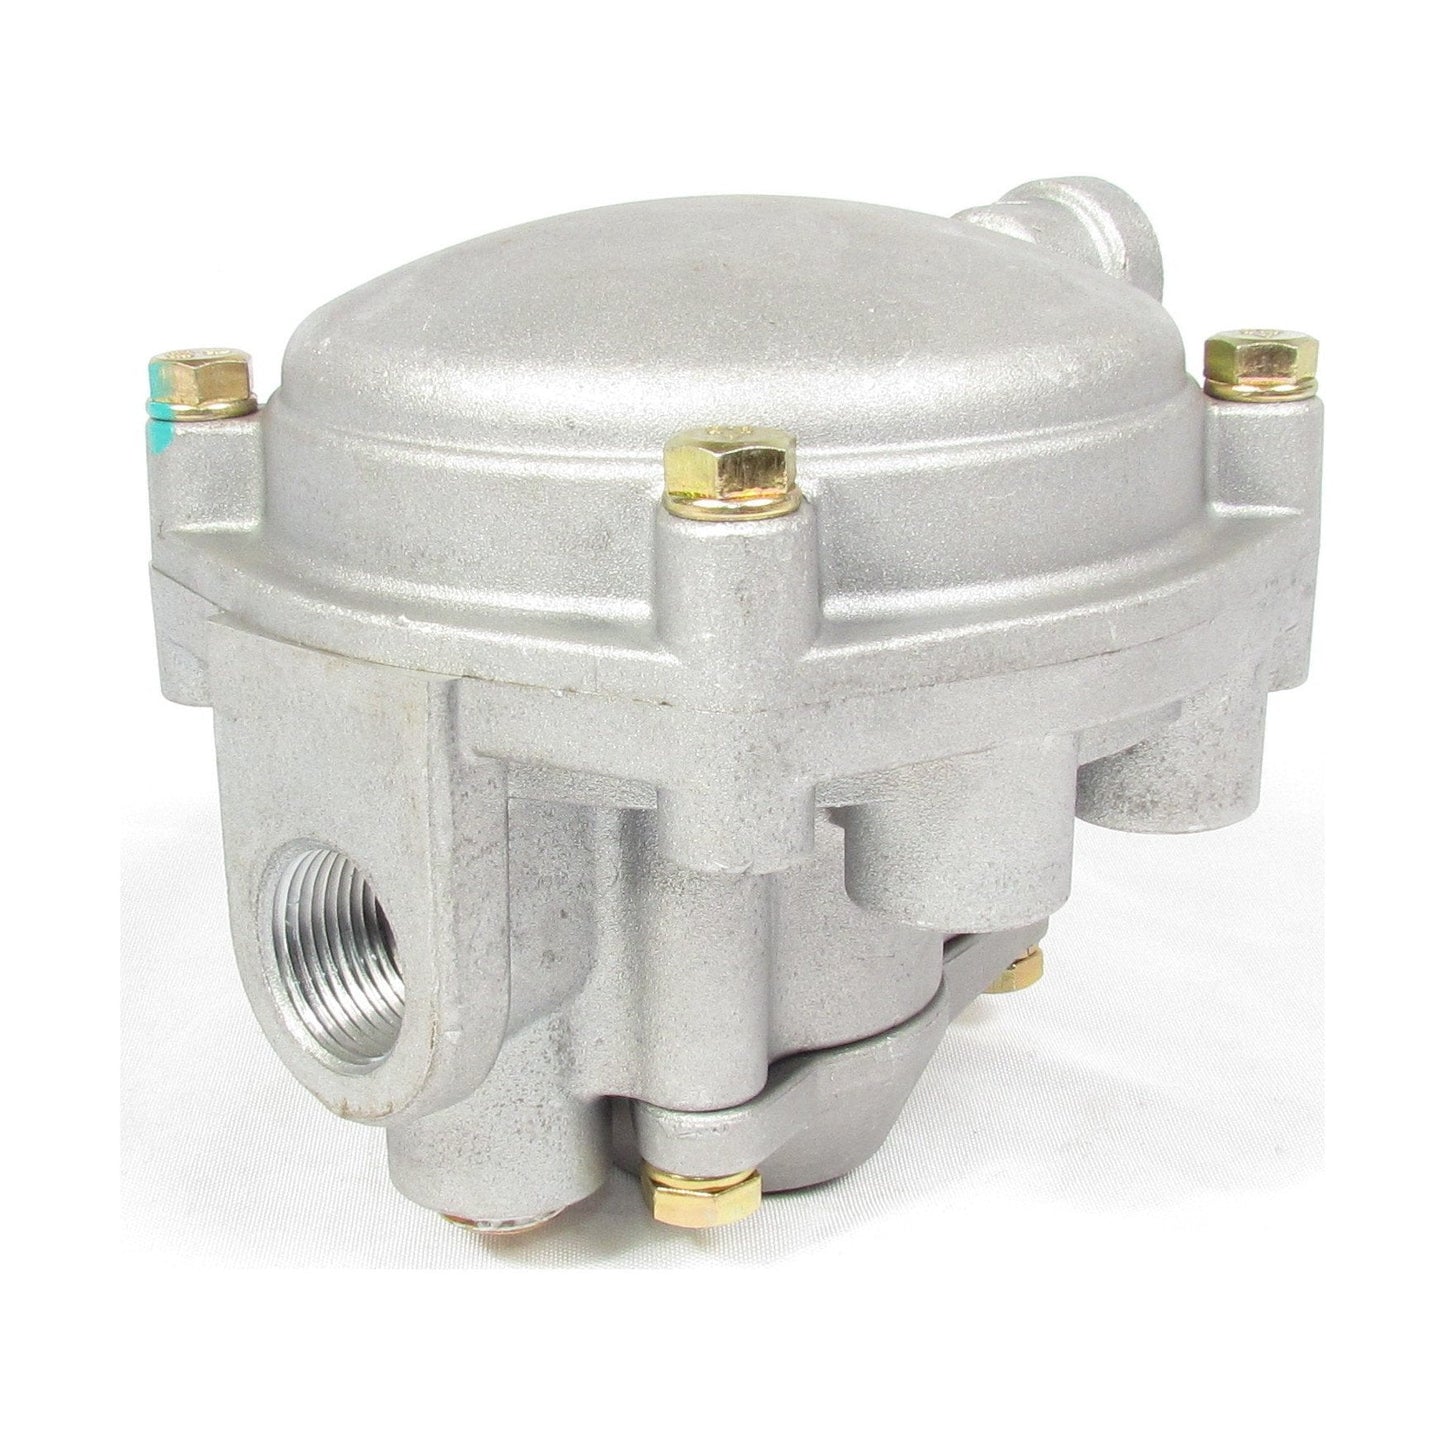 F224703 | RE-6 EMERGENCY RELAY VALVE | Replace 281865 | LEV-3614